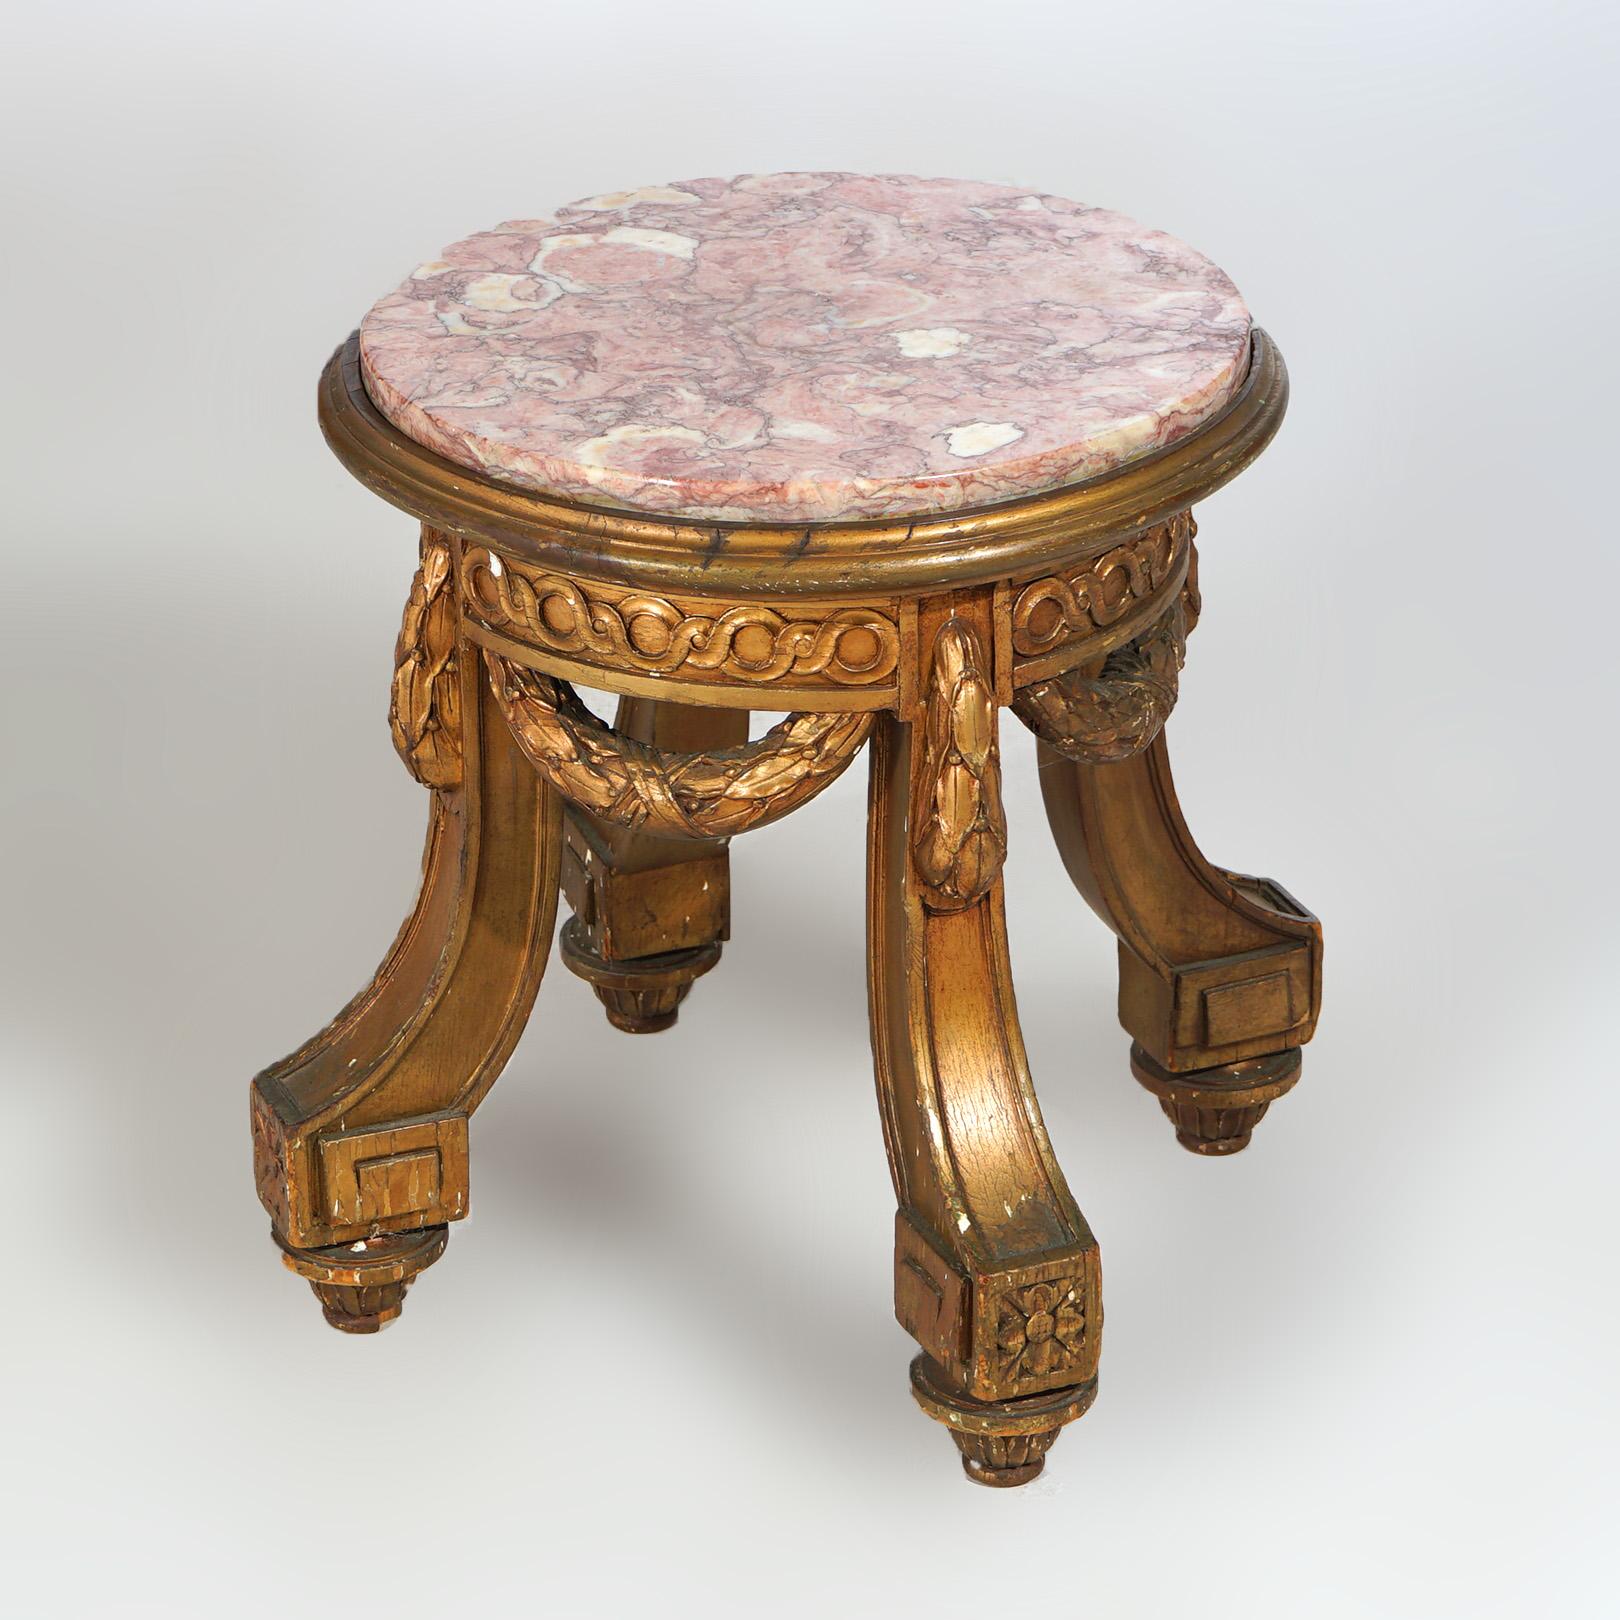 An antique French Louis XVI style low stand offers circular marble top over giltwood base having foliate swag and Greek Key decoration, c1820

Measures- 18''H x 20''W x 20''D